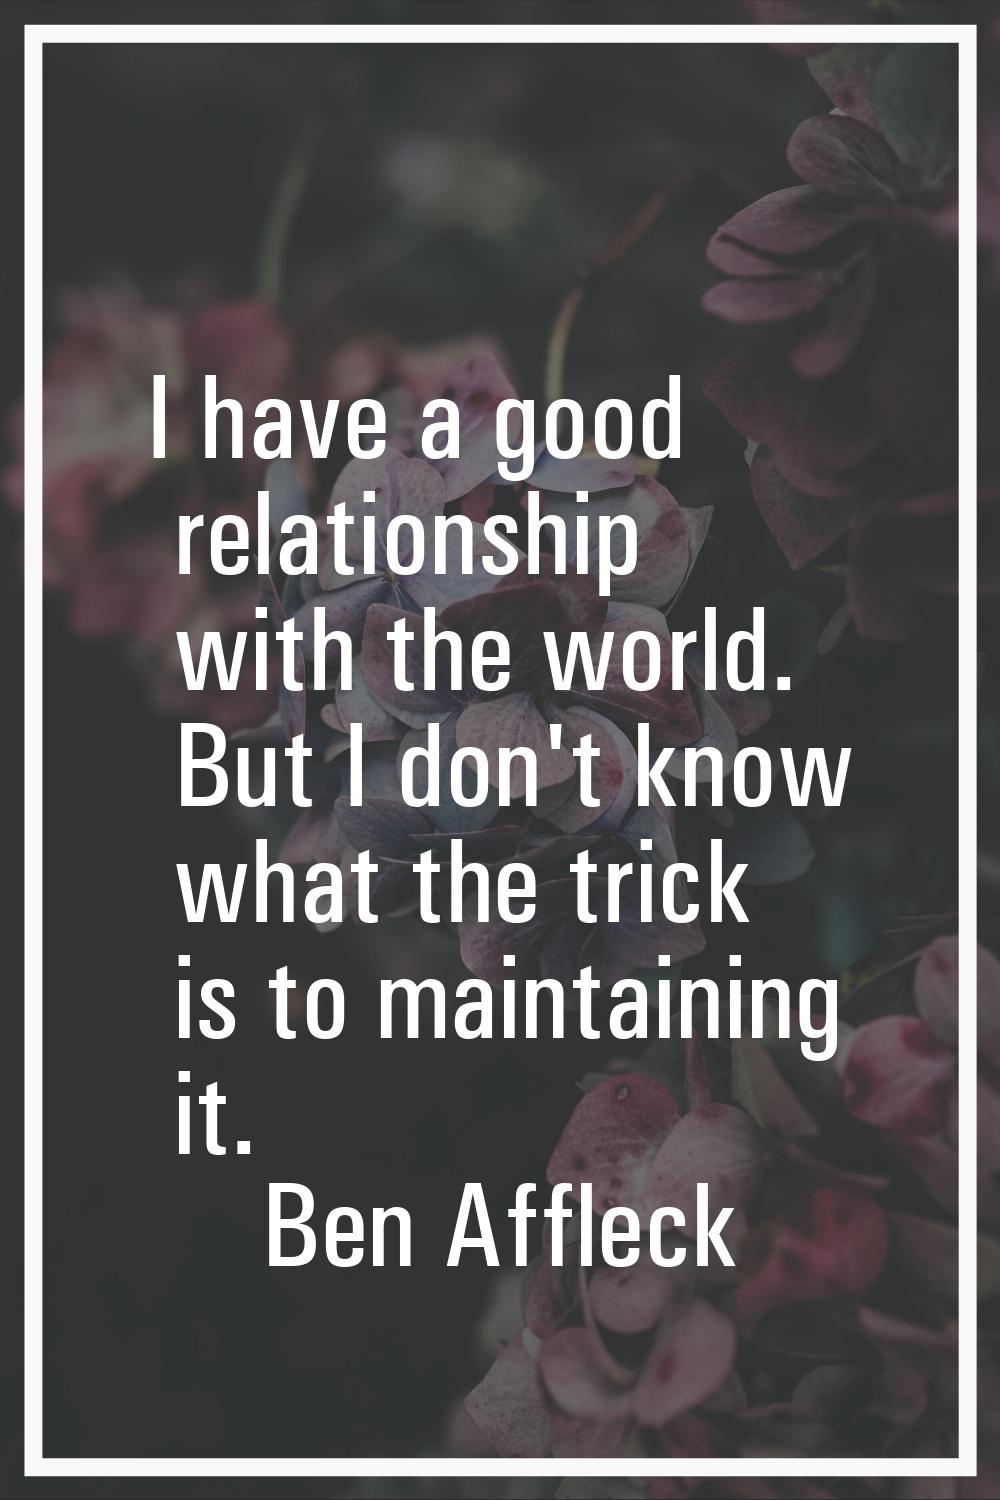 I have a good relationship with the world. But I don't know what the trick is to maintaining it.